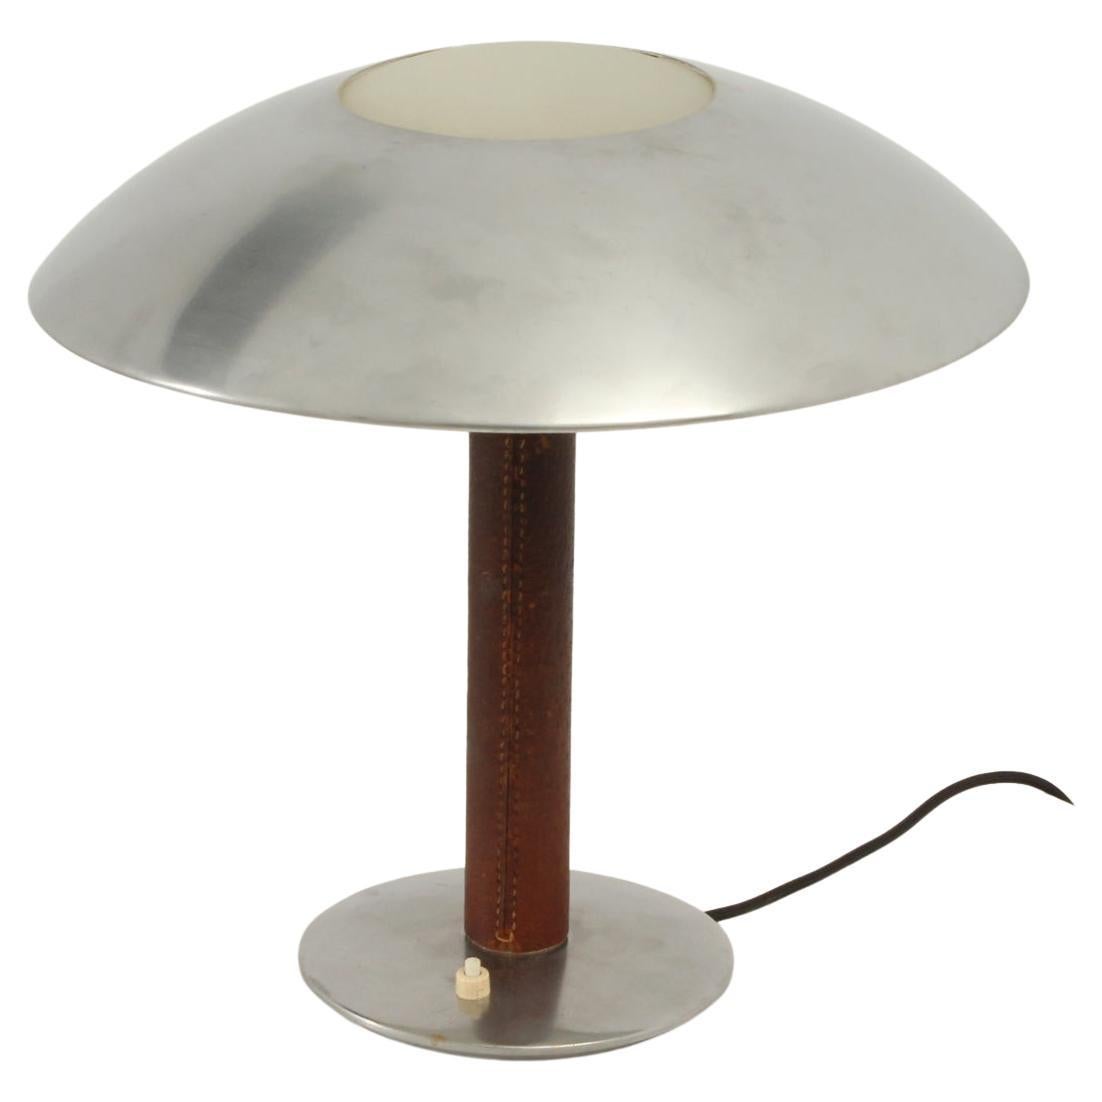 Steel and Leather Table Lamp by Metalarte, Spain, 1950's